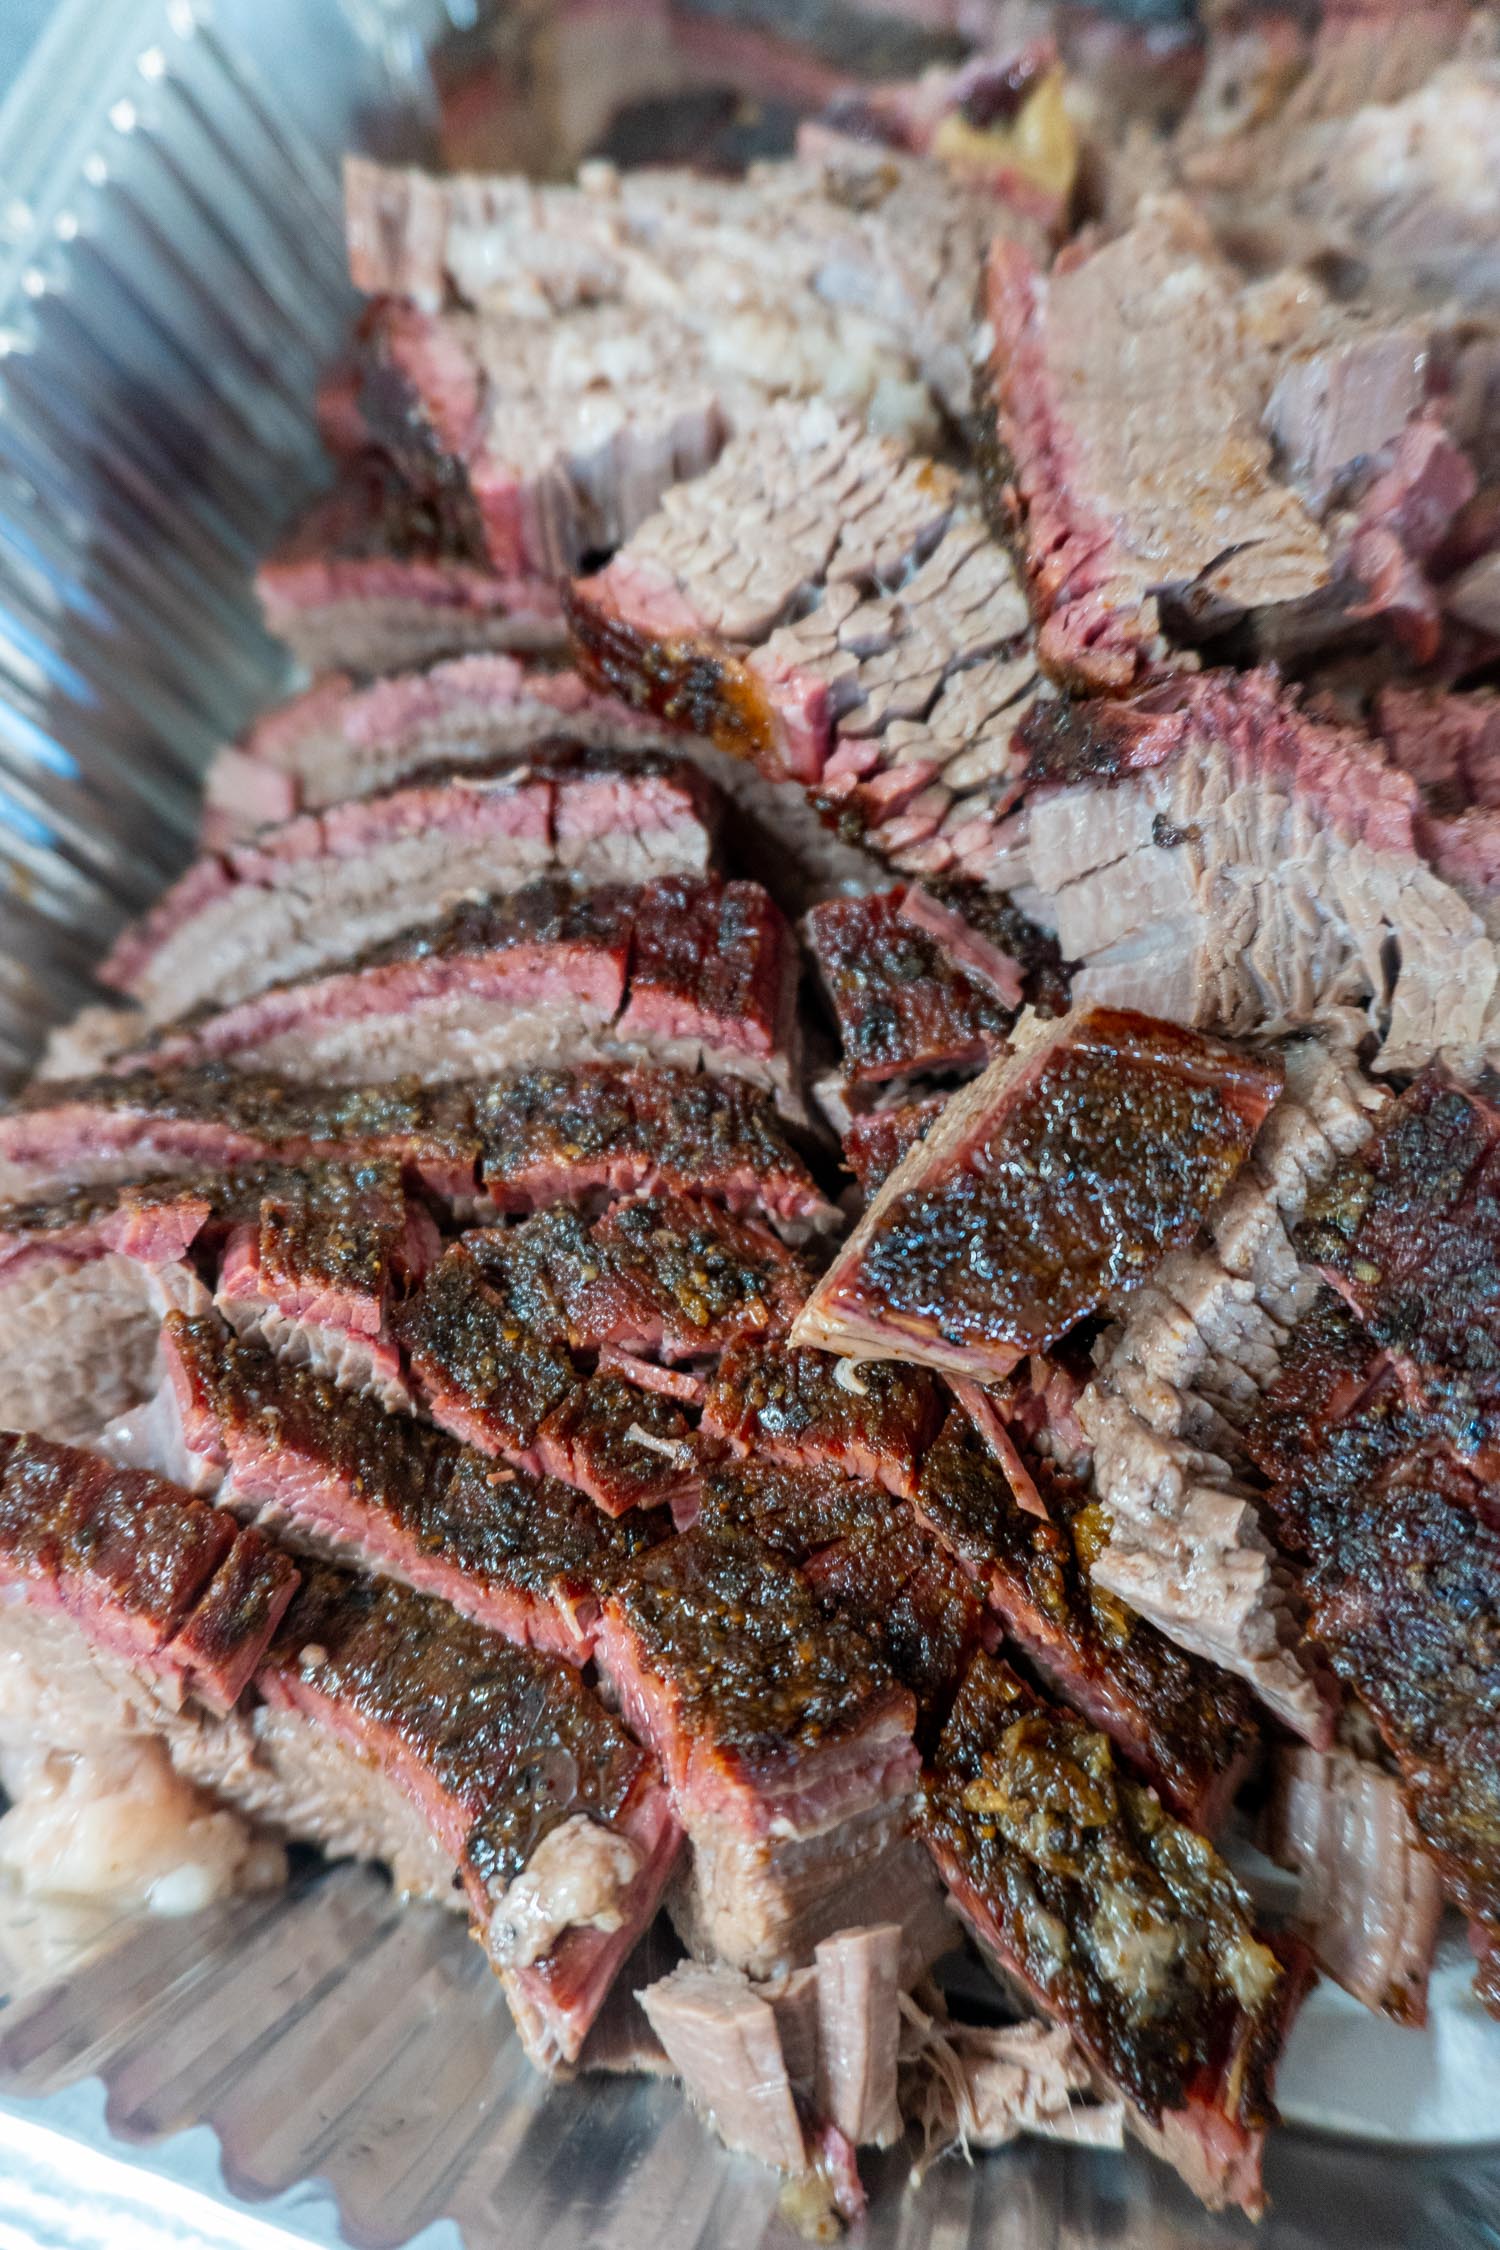 Sliced brisket ready for a party